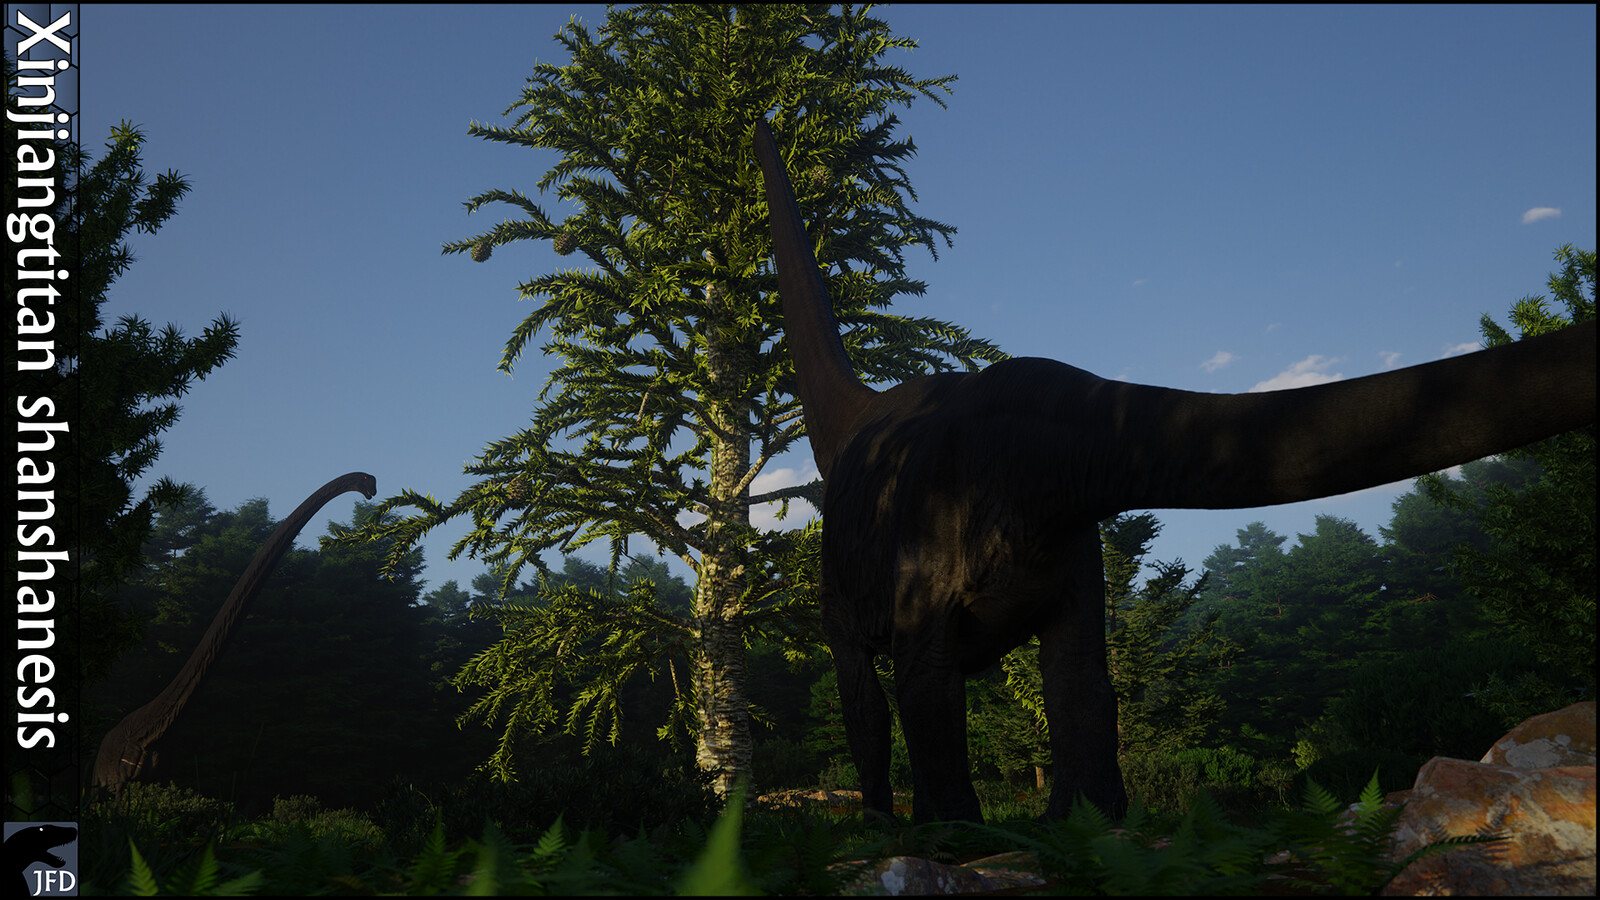 Xinjiangtitan shanshanesis walks into a clearing around an ancient Araucaria, however a much more massive Sauropod is already present. This titan of an animal, while a extremely similar to Xinjiangtitan itself is not Xinjiangtitan.